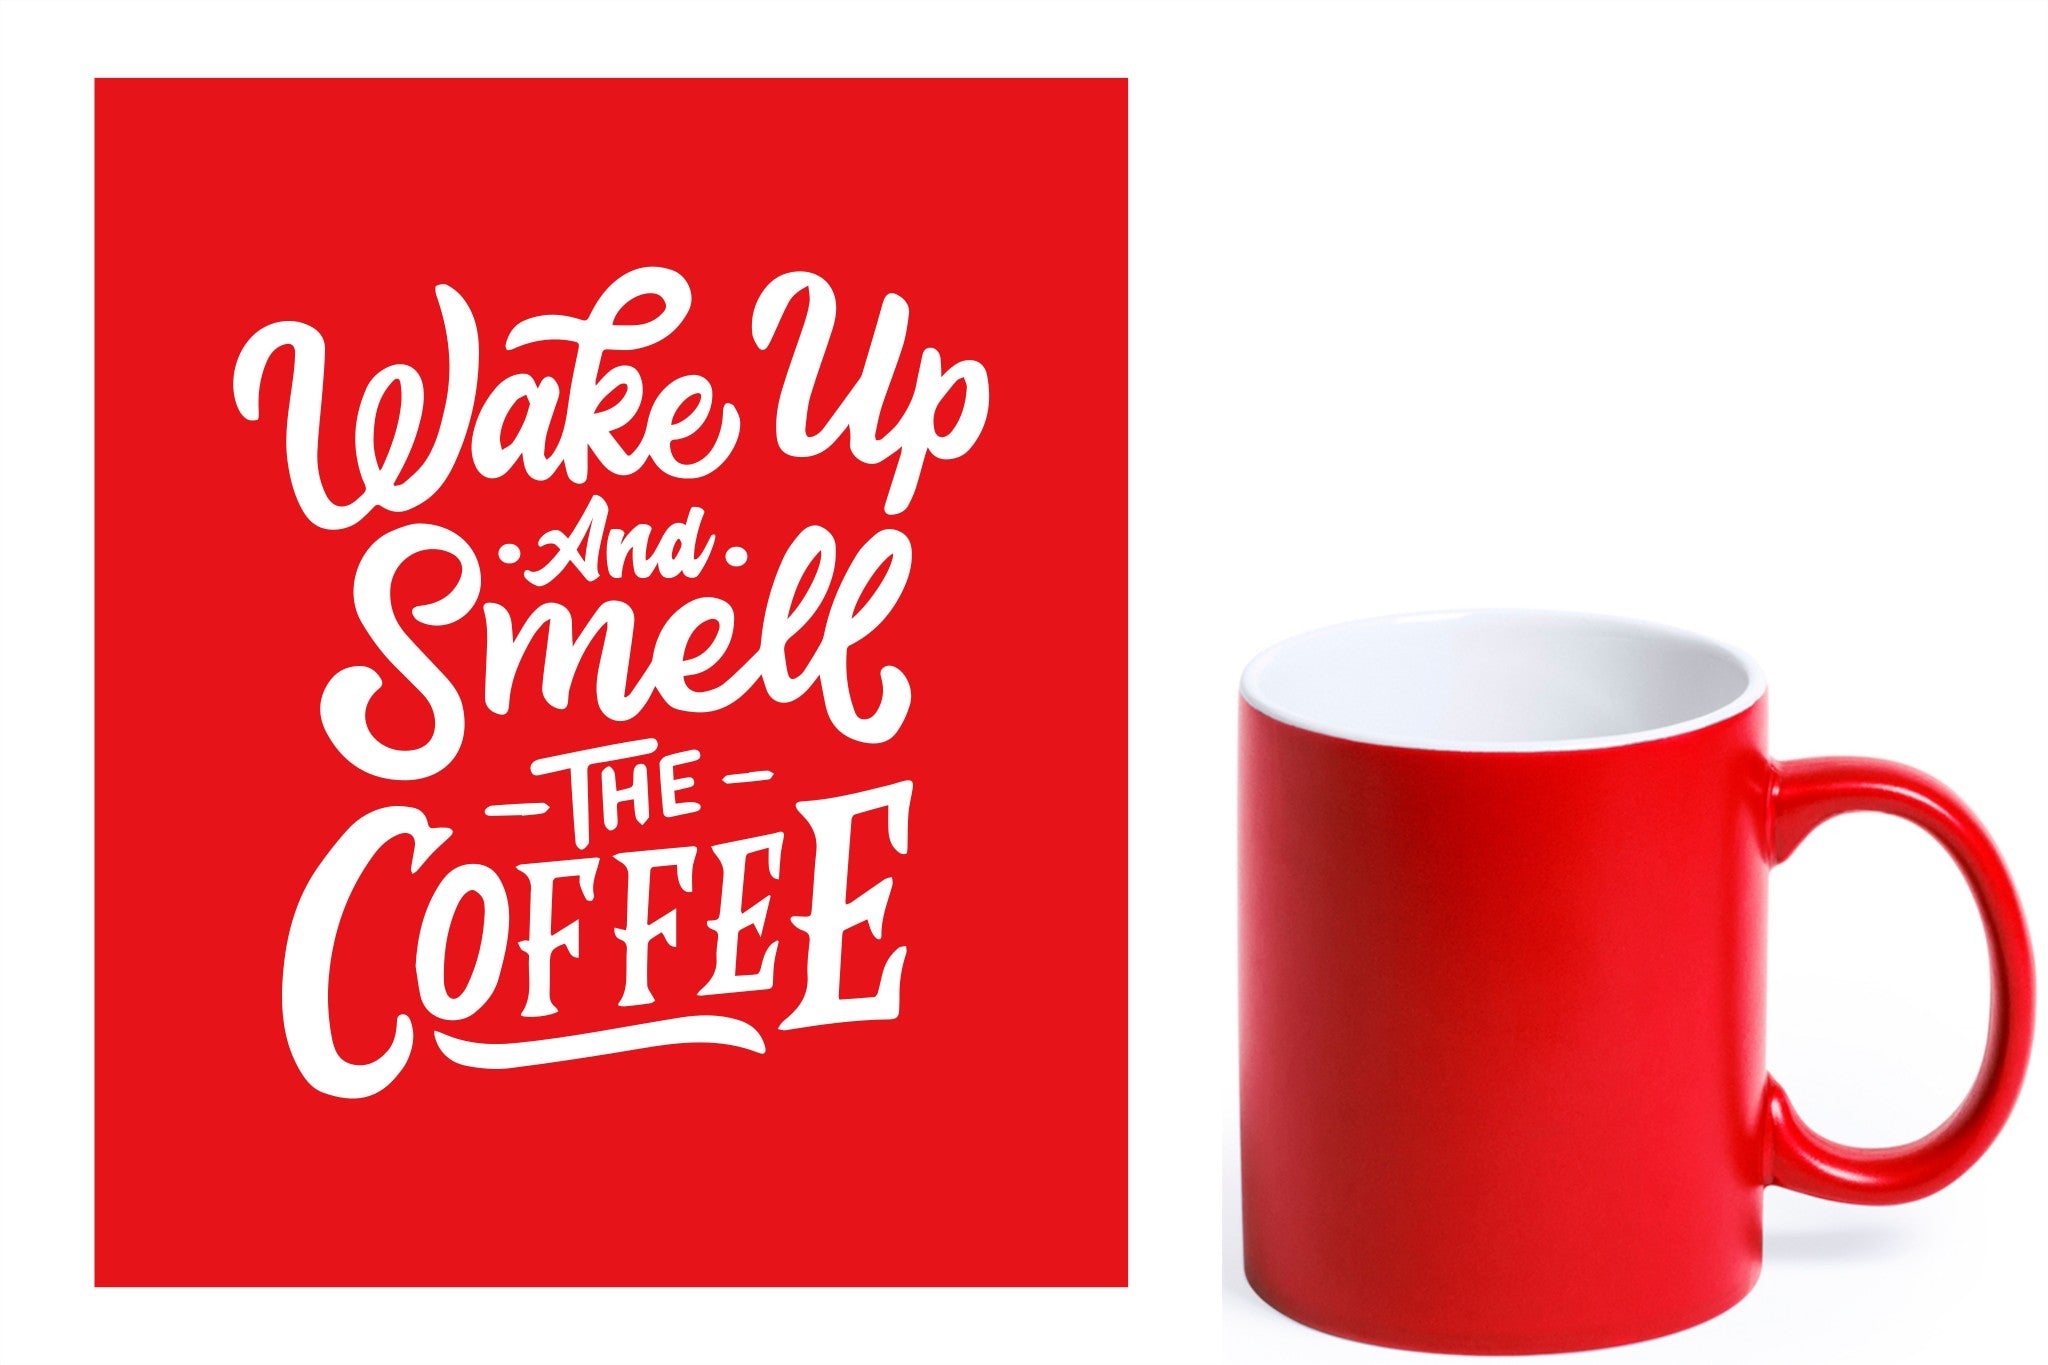 rode keramische mok met witte gravure  'Wake up and smell the coffee'.